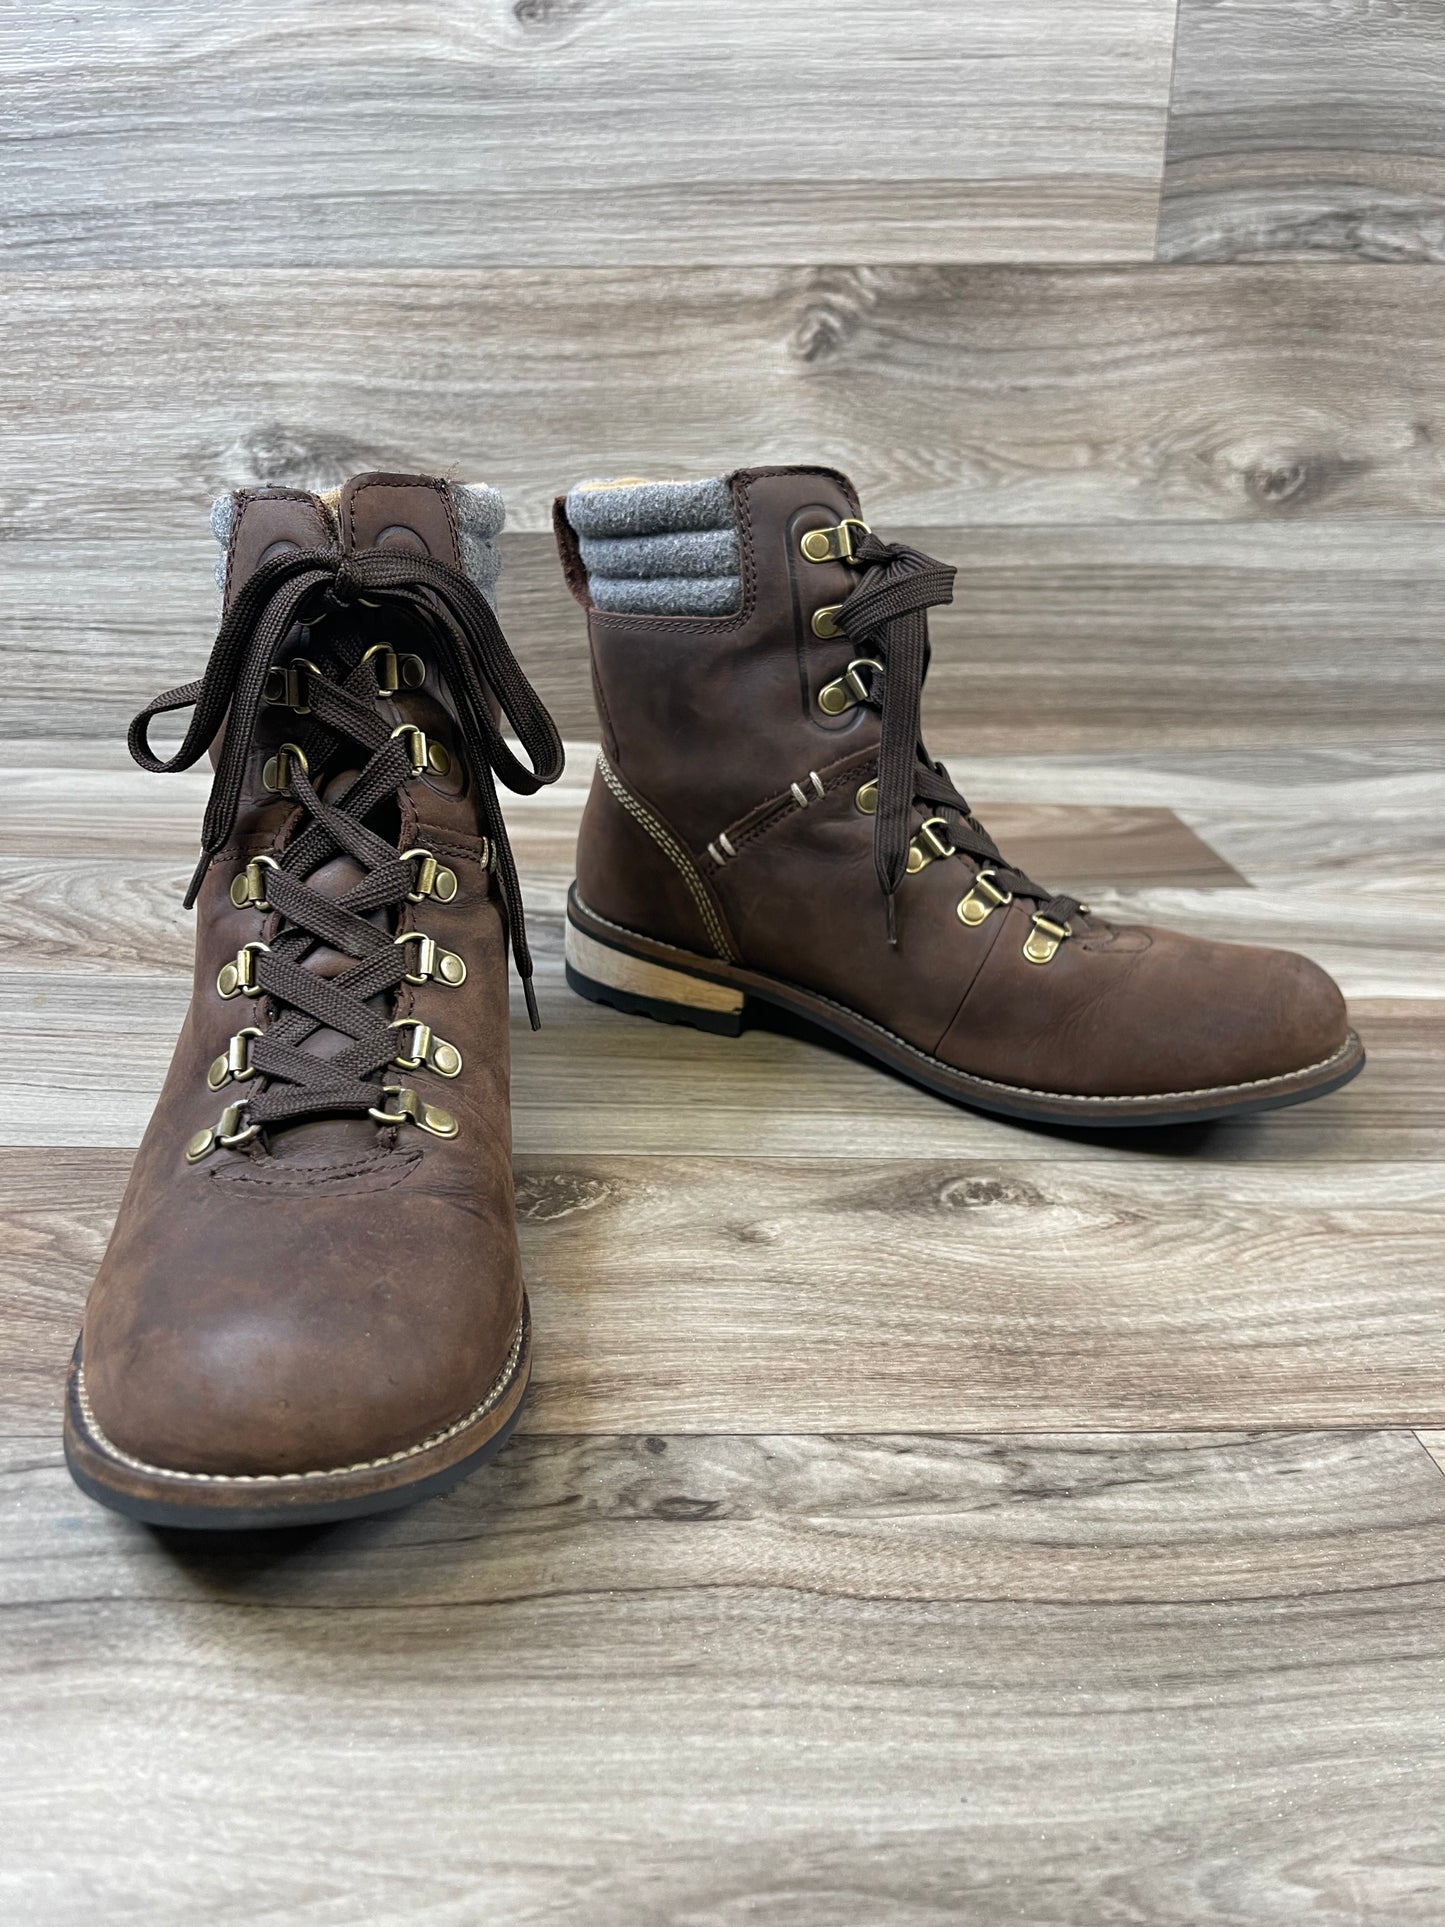 Boots Hiking By Clothes Mentor  Size: 9.5